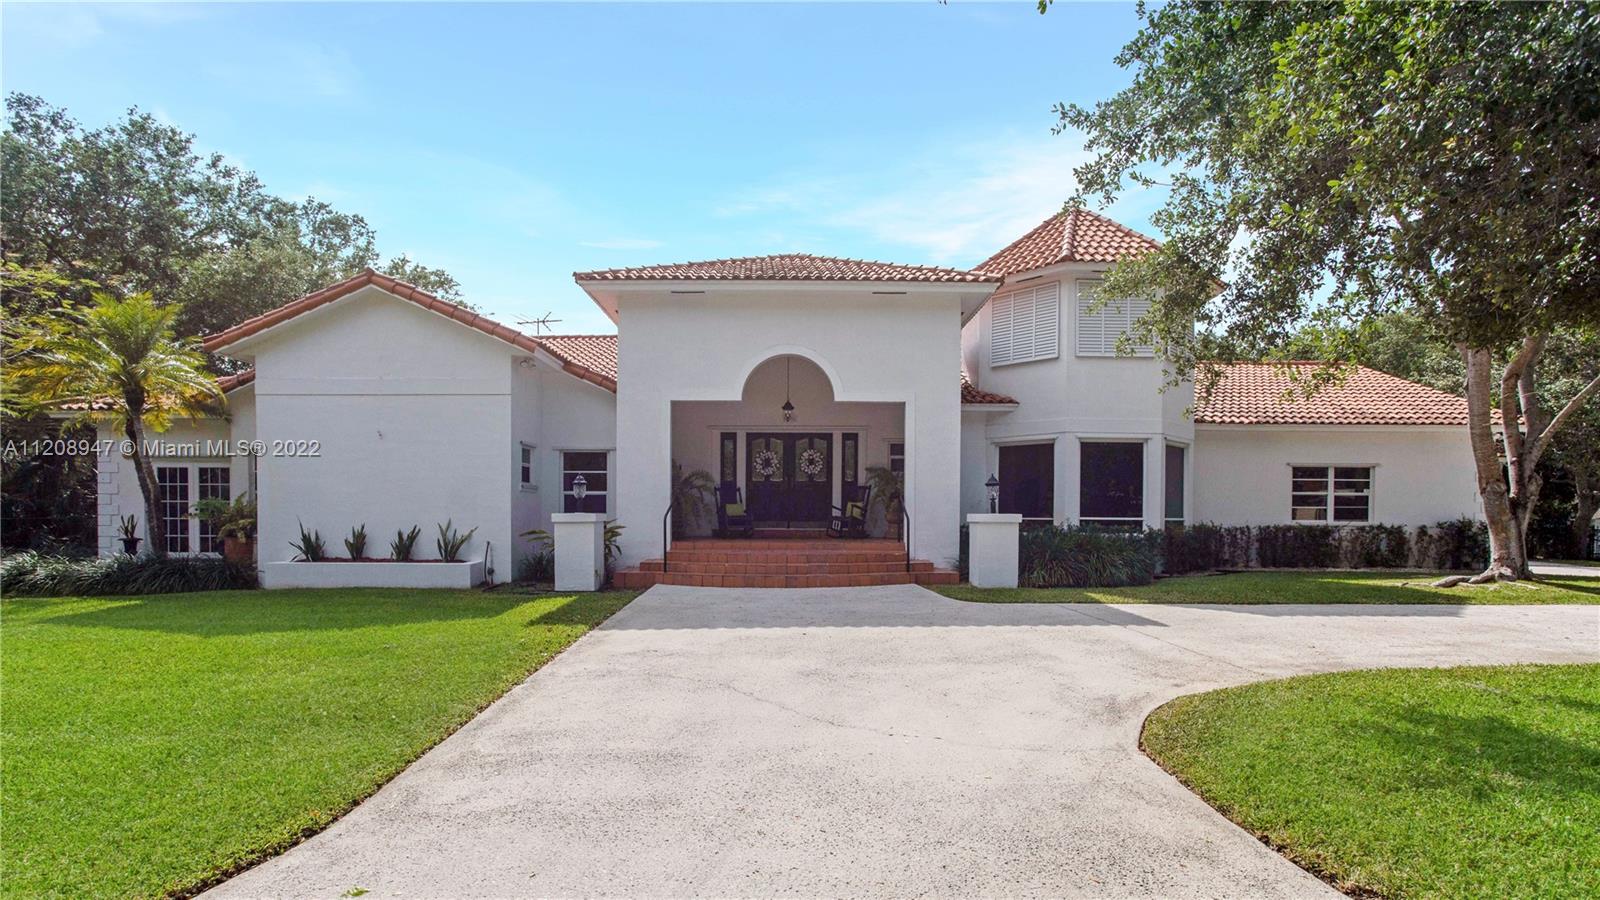 Beautiful 5br/4full & 2 half bh home on private secluded builder's ac. 4454 adj sq.ft. Two double car garages (one accommodates boat).Close to prestigious private schools(Palmer Trinity, Westminster, Montessori, top rated public school Palmetto High).Lots of natural light, french doors, large windows,high volume ceilings throughout home.Fenced & walled yard with numerous large established trees: oak pines palms palmettos mango avocado lychee starfruit & an undisturbed natural florida hammock. 1.5 miles to bay for kayaking, canoeing & windsurfing,4.5 mi. to Black Point Marina.Walk to neighborhood park on waterway. Large family rm with French drs to covered screened patio & to pool area.Laundry room, wifi antennas throughout house, tile flooring (wood floors in 4 bedrooms). Fabulous home!